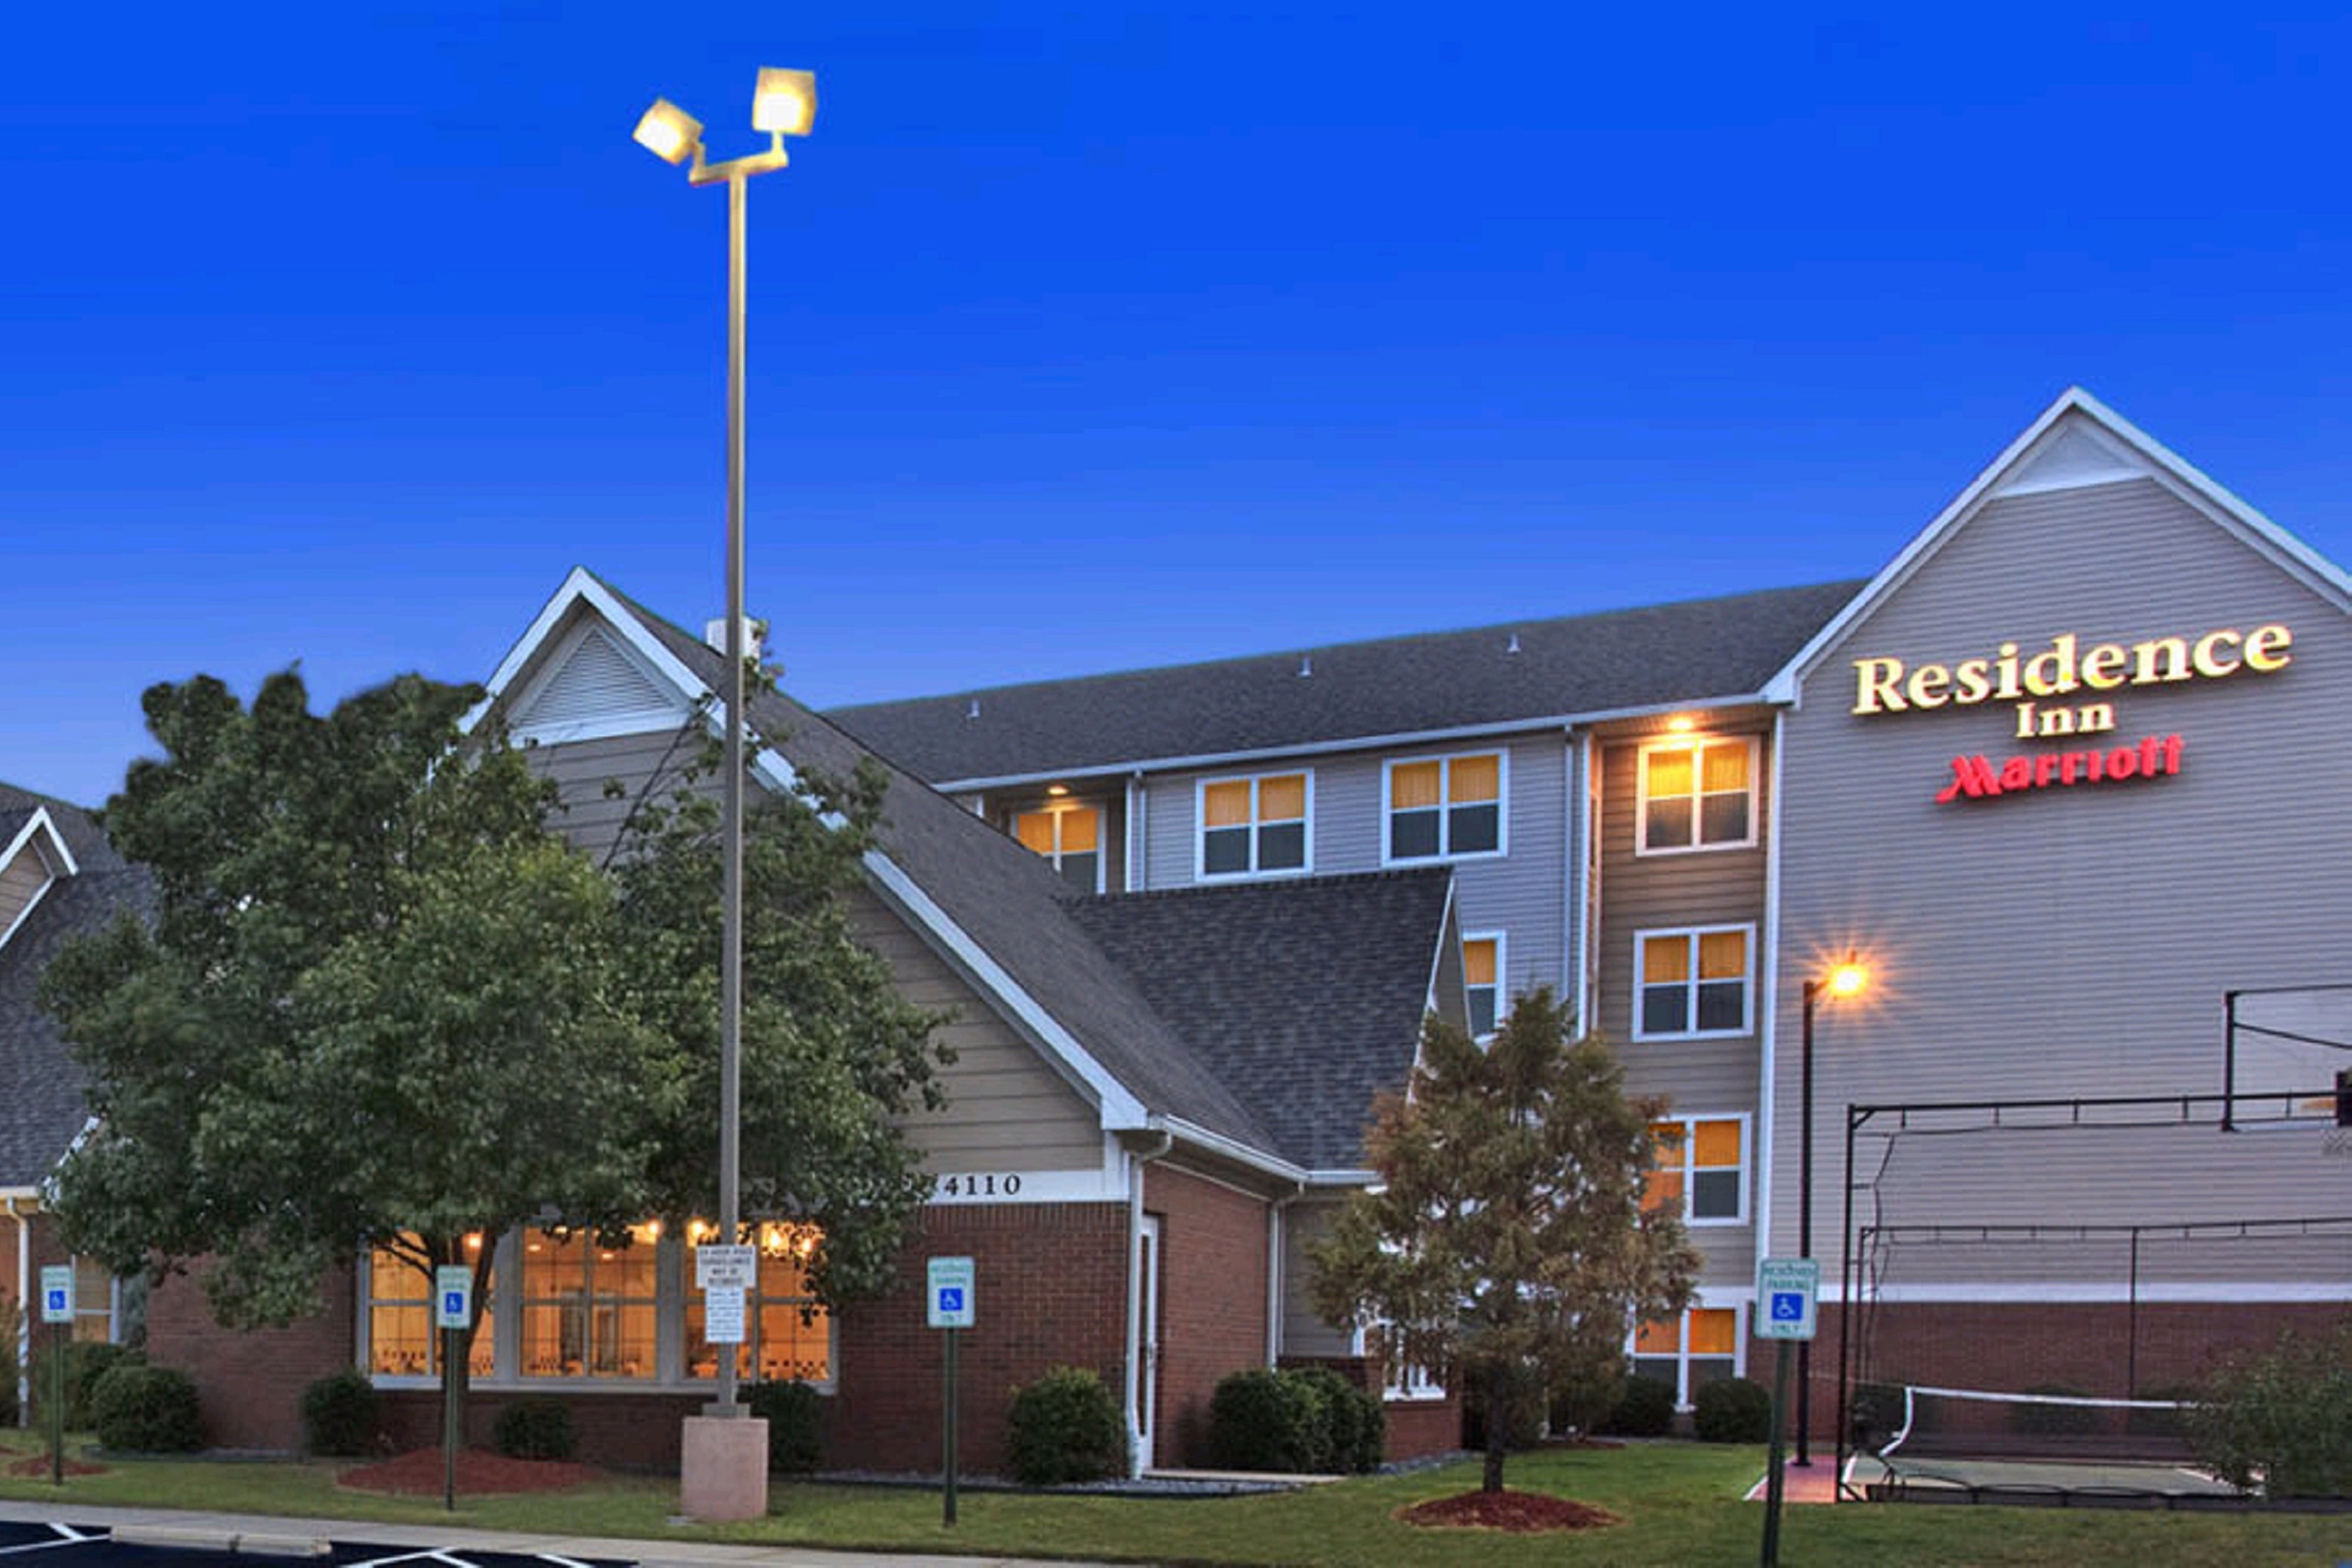 Photo of Residence Inn by Marriott Little Rock North, North Little Rock, AR